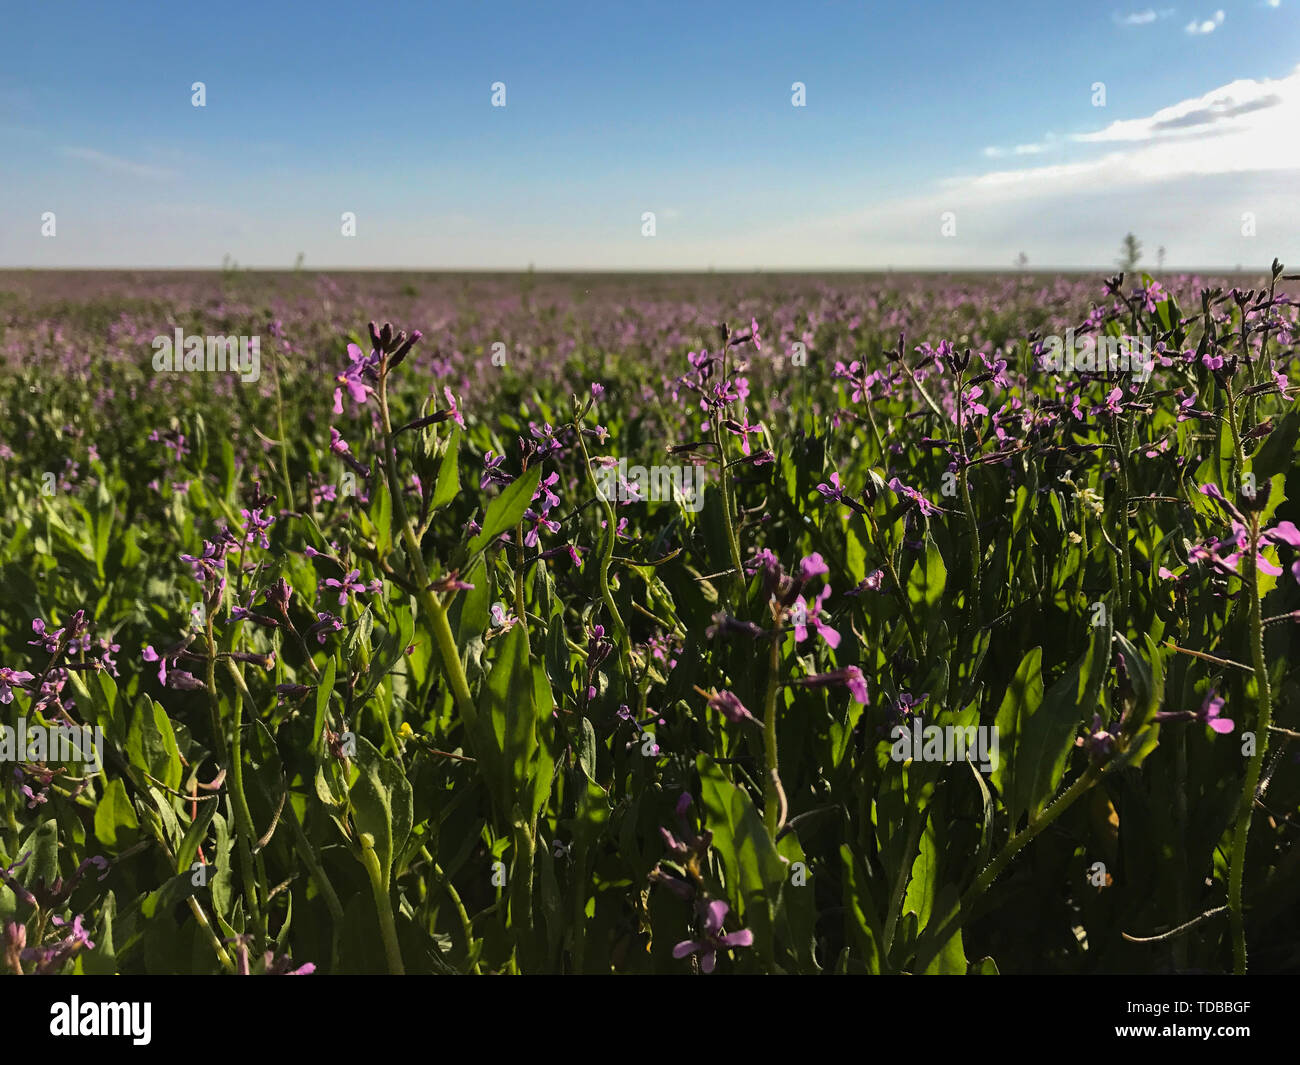 huge field and sky with small purple flowers Stock Photo